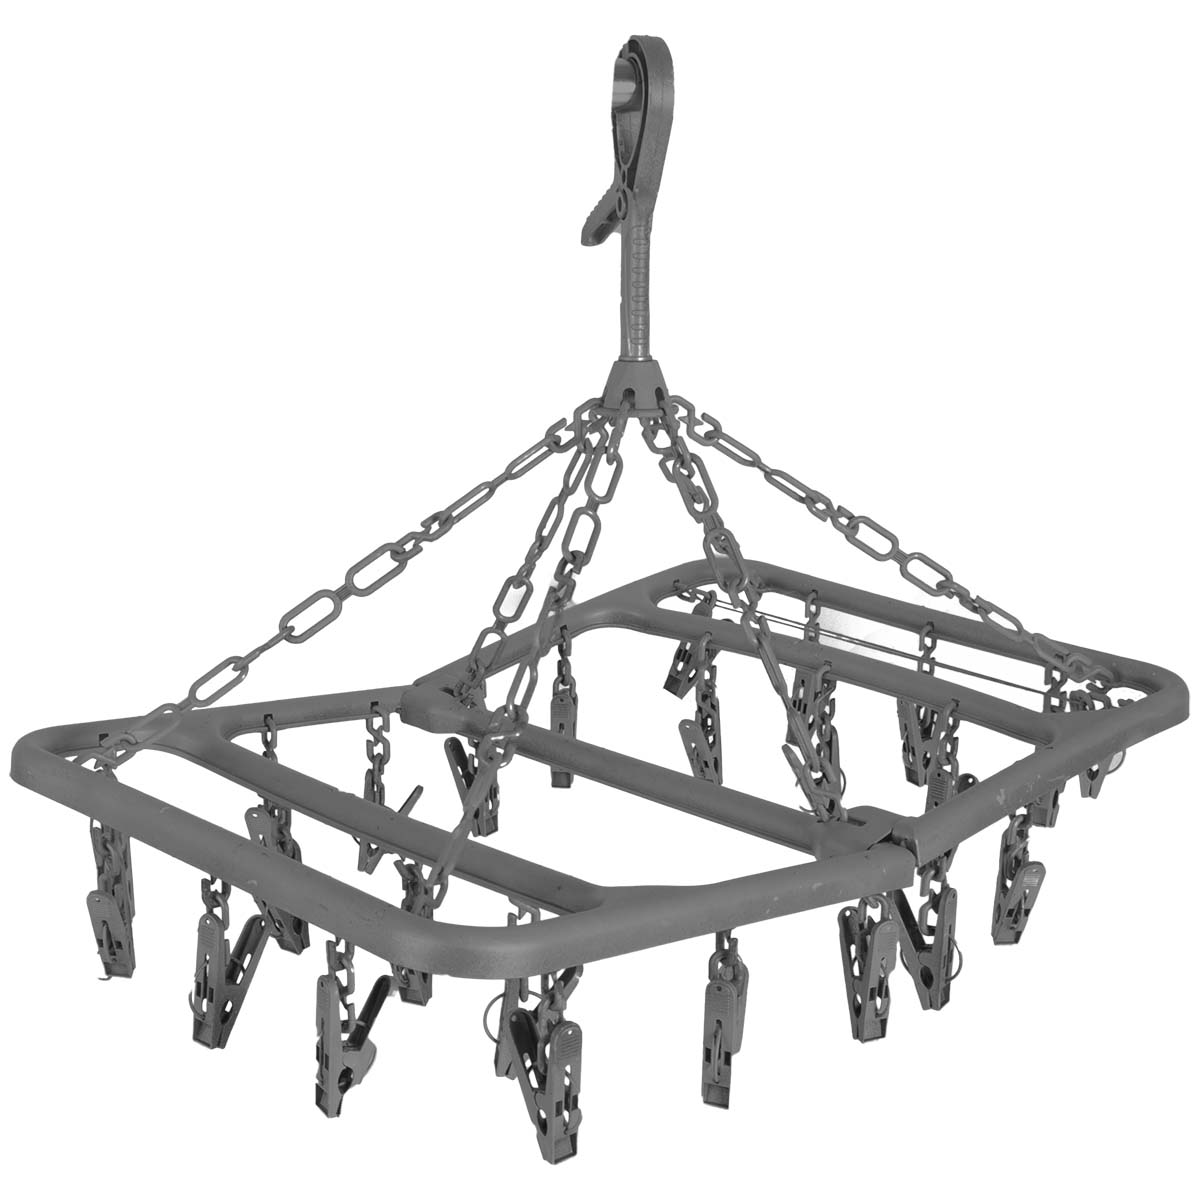 6415150 A rectangular drying carousel made of plastic. Can be fixed in many places by the suspension hook. Lightweight and very compact foldable. Has 24 clothespins.